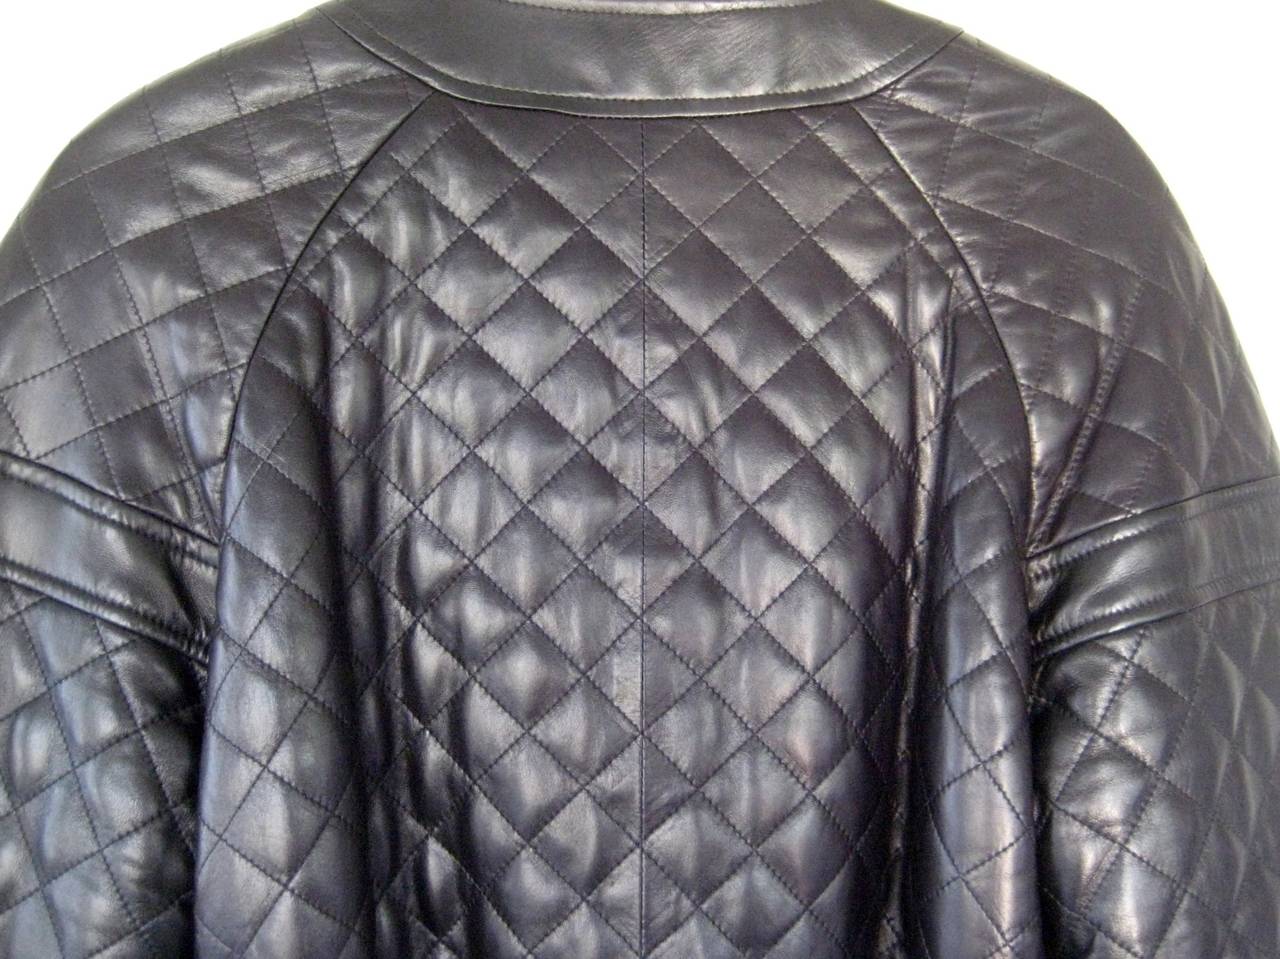 Women's 1990s Chanel Quilted Black Leather Bomber Jacket